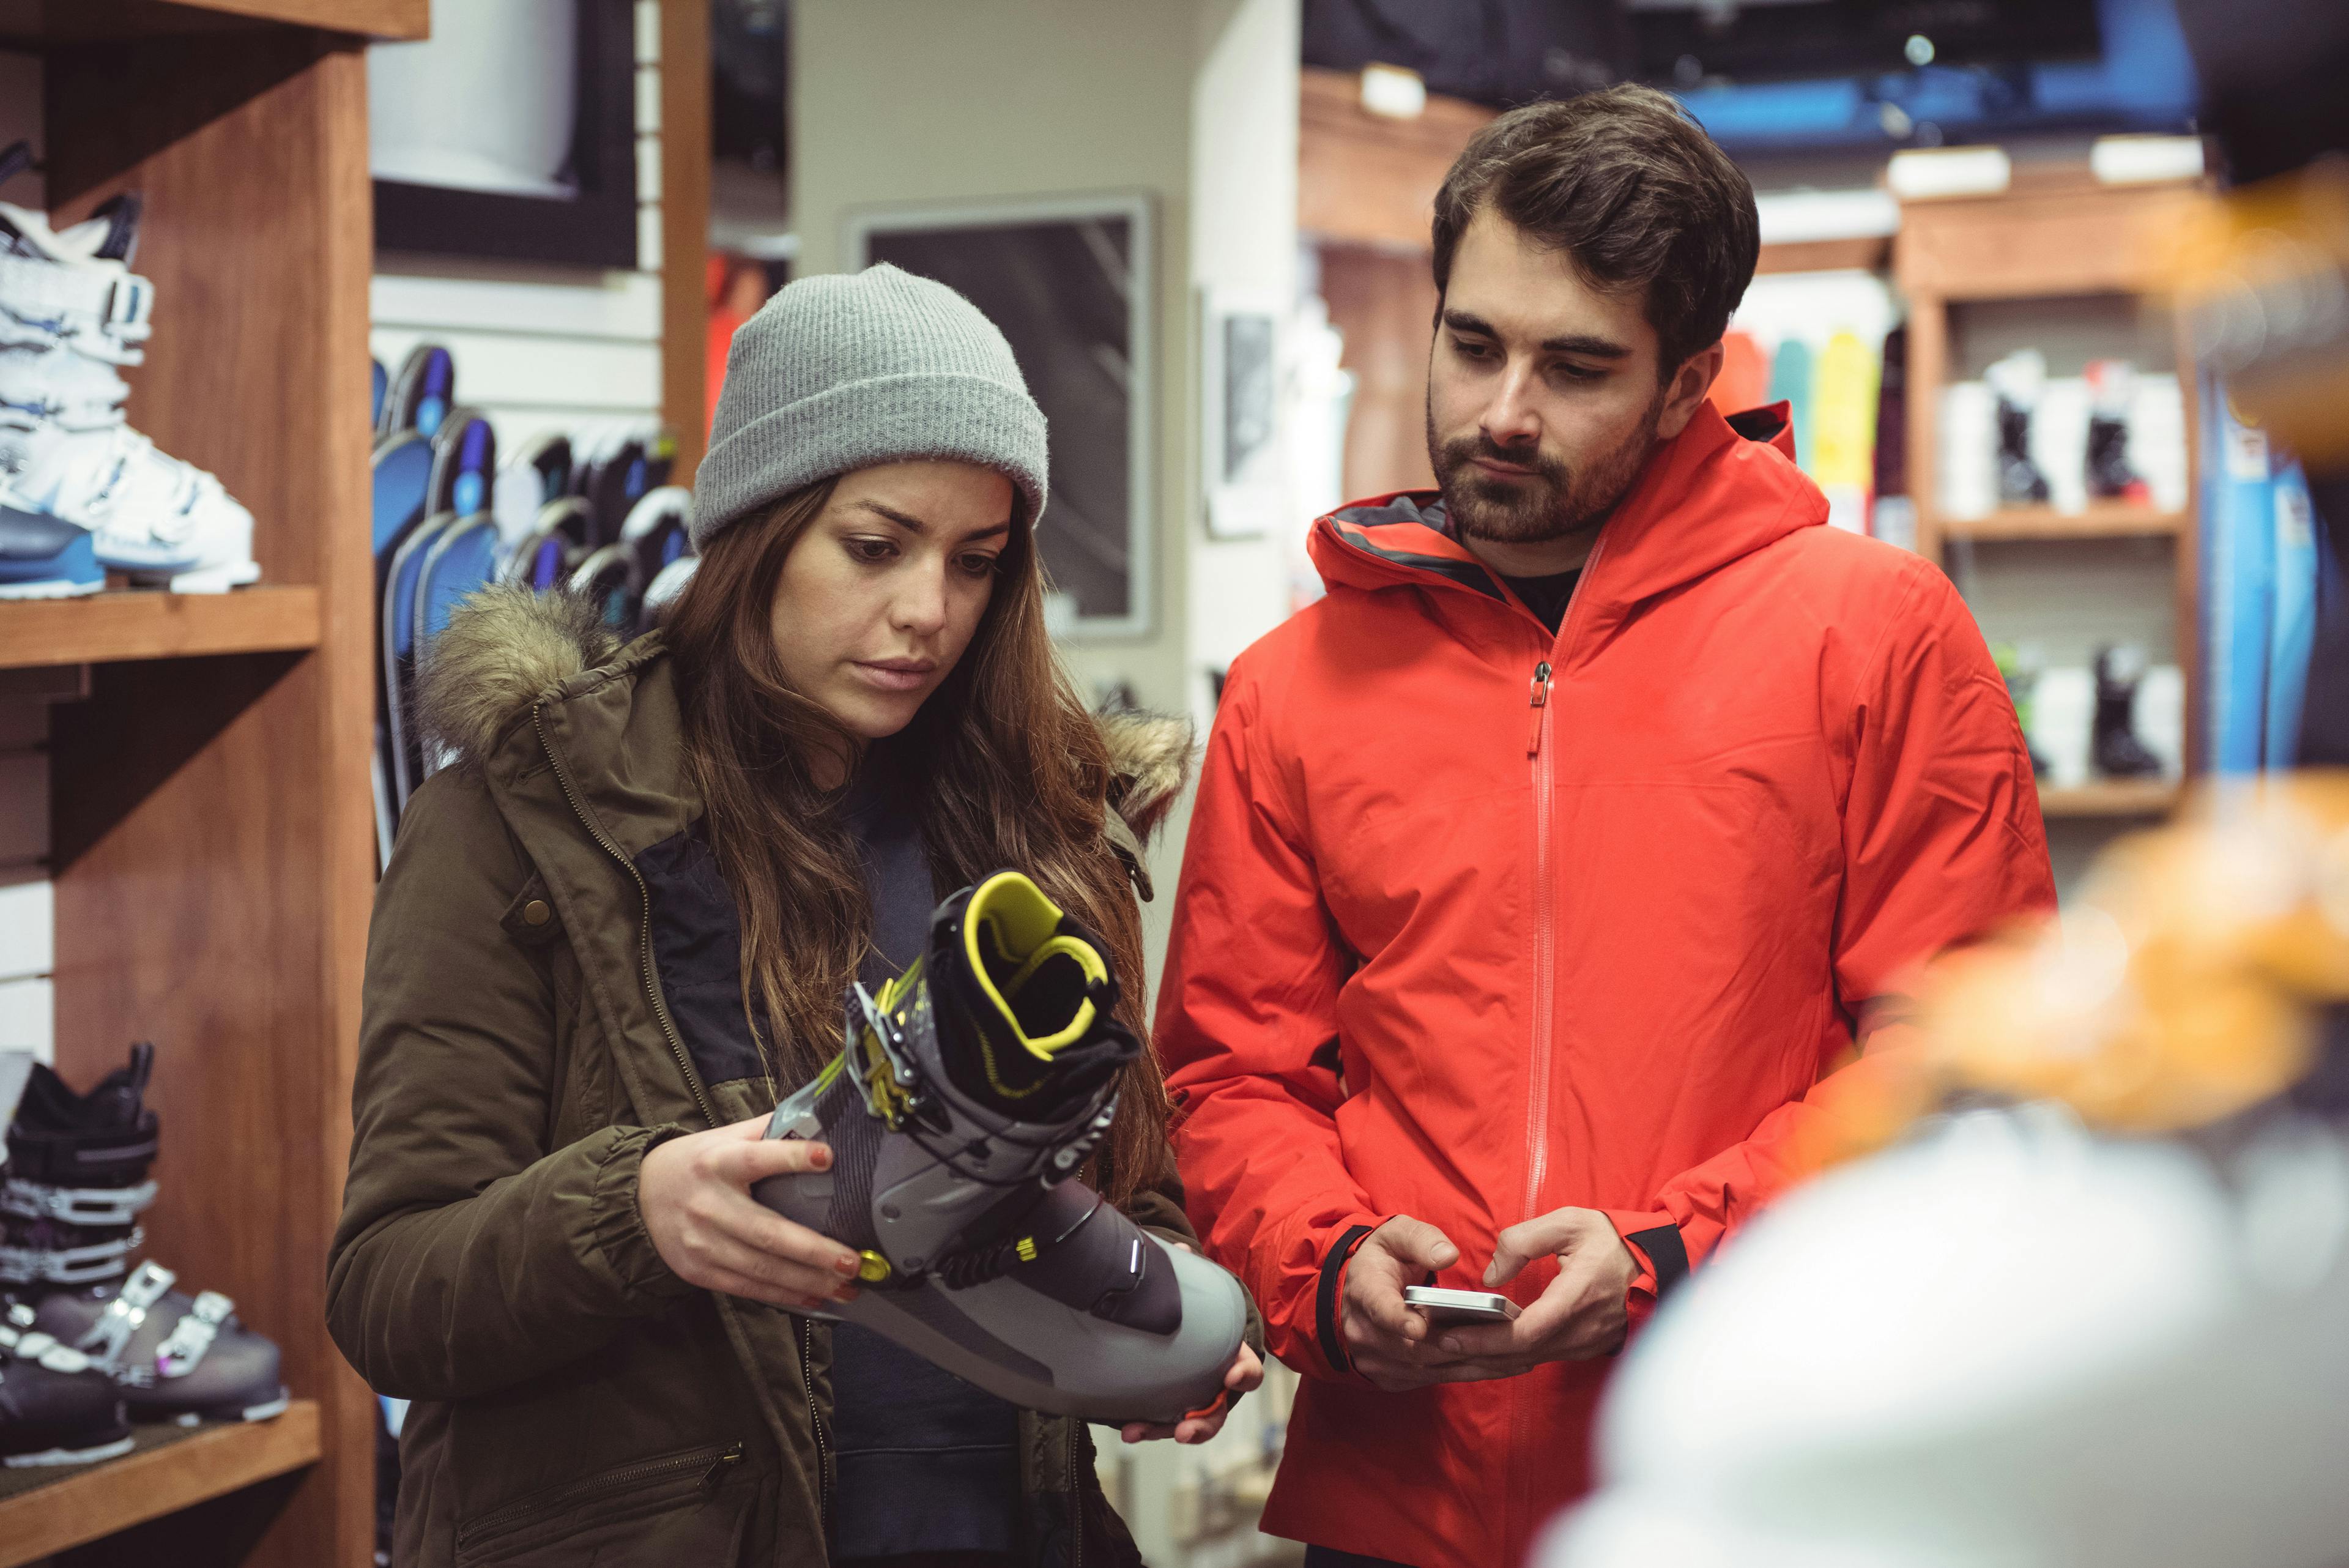 Seven steps to help your customers make tough buying decisions